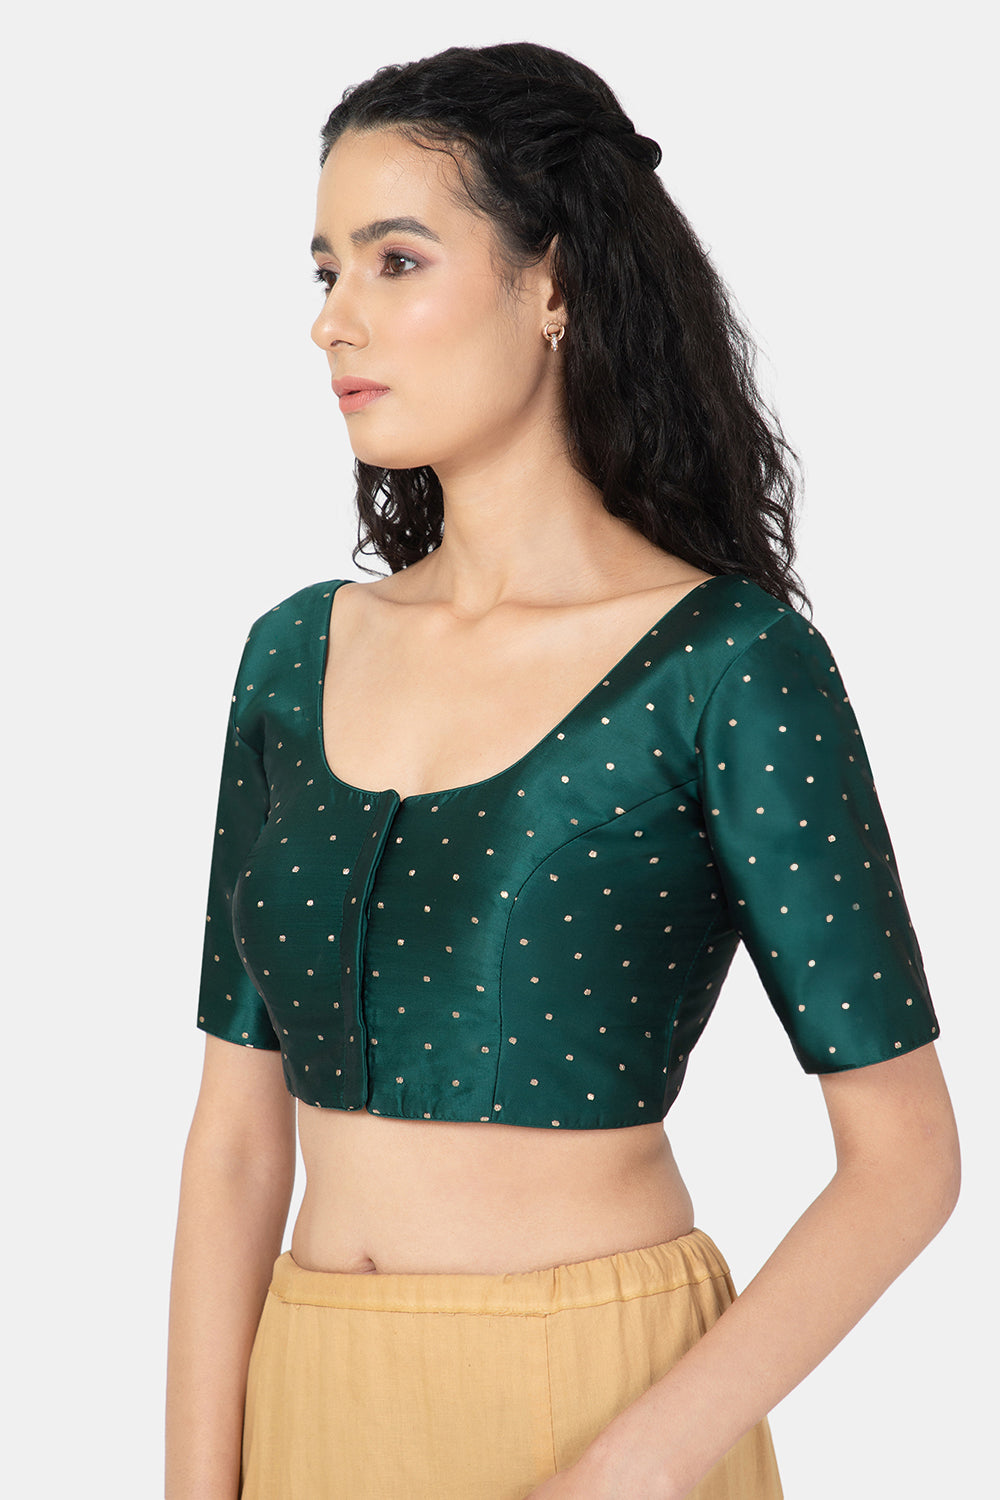 Naidu Hall Ethnic Jacquard Saree Blouse with Round Neck Elbow Sleeves - Bottle Green